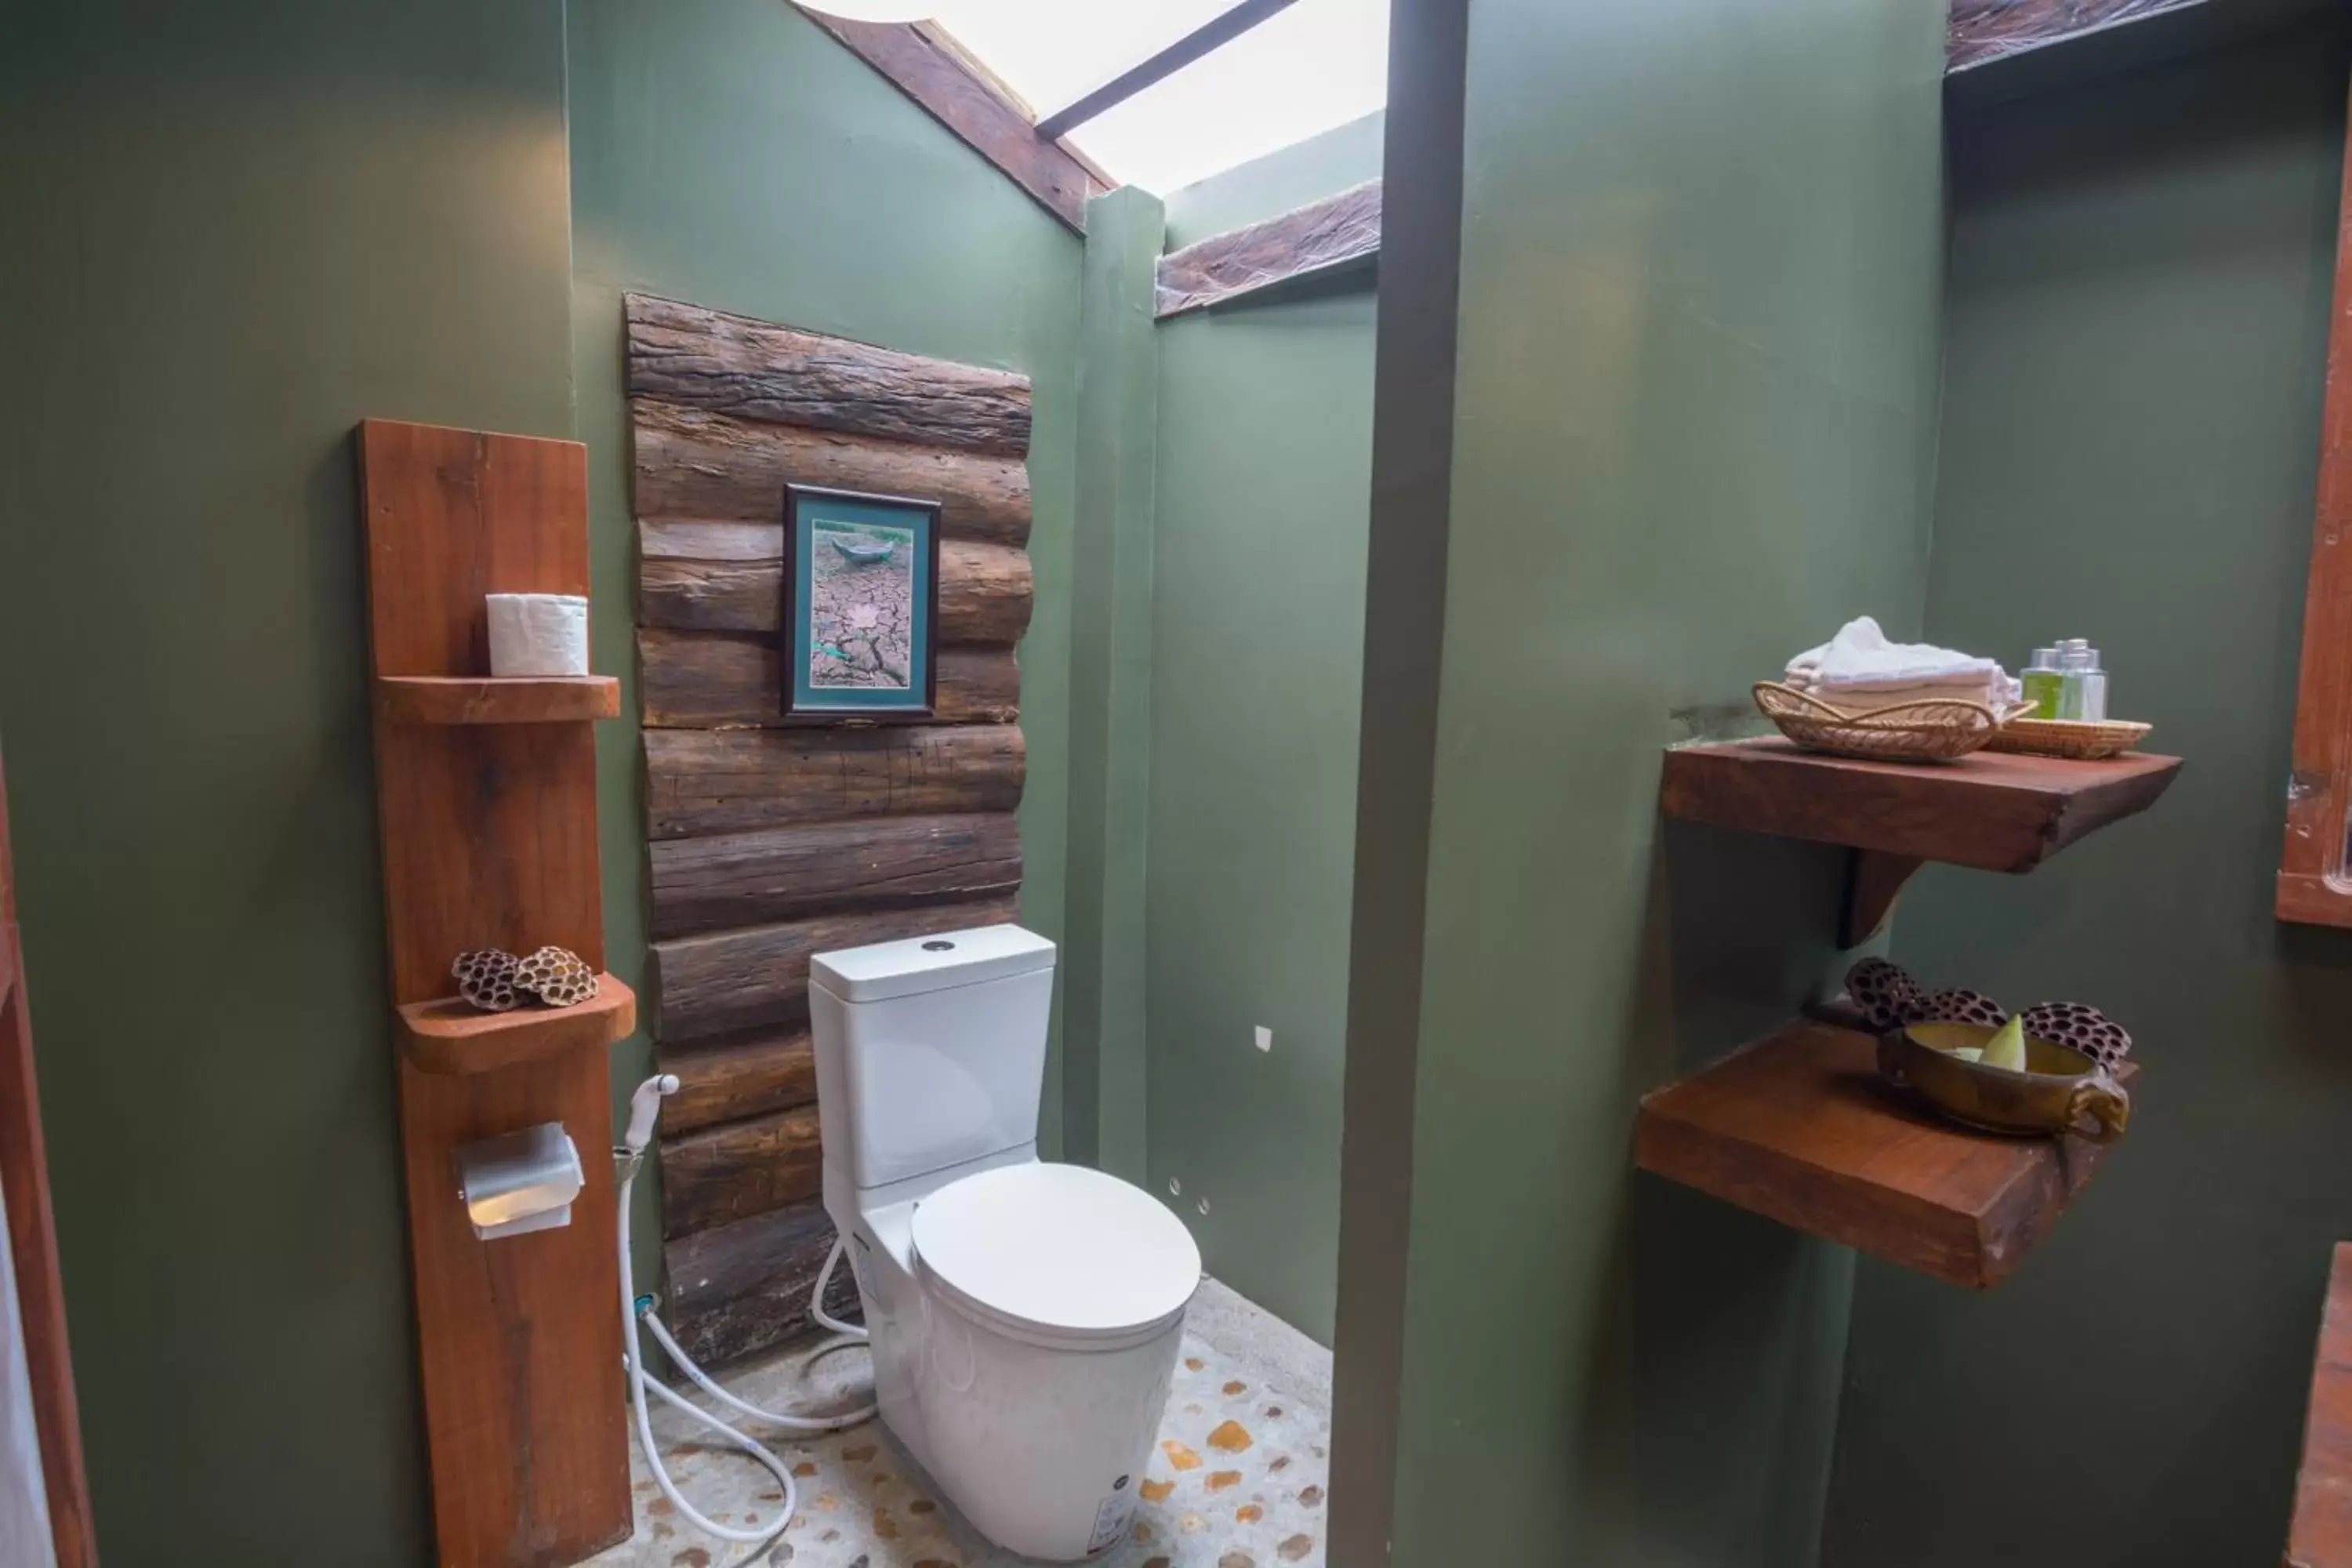 Bathroom in Bong Thom Forest Lodge